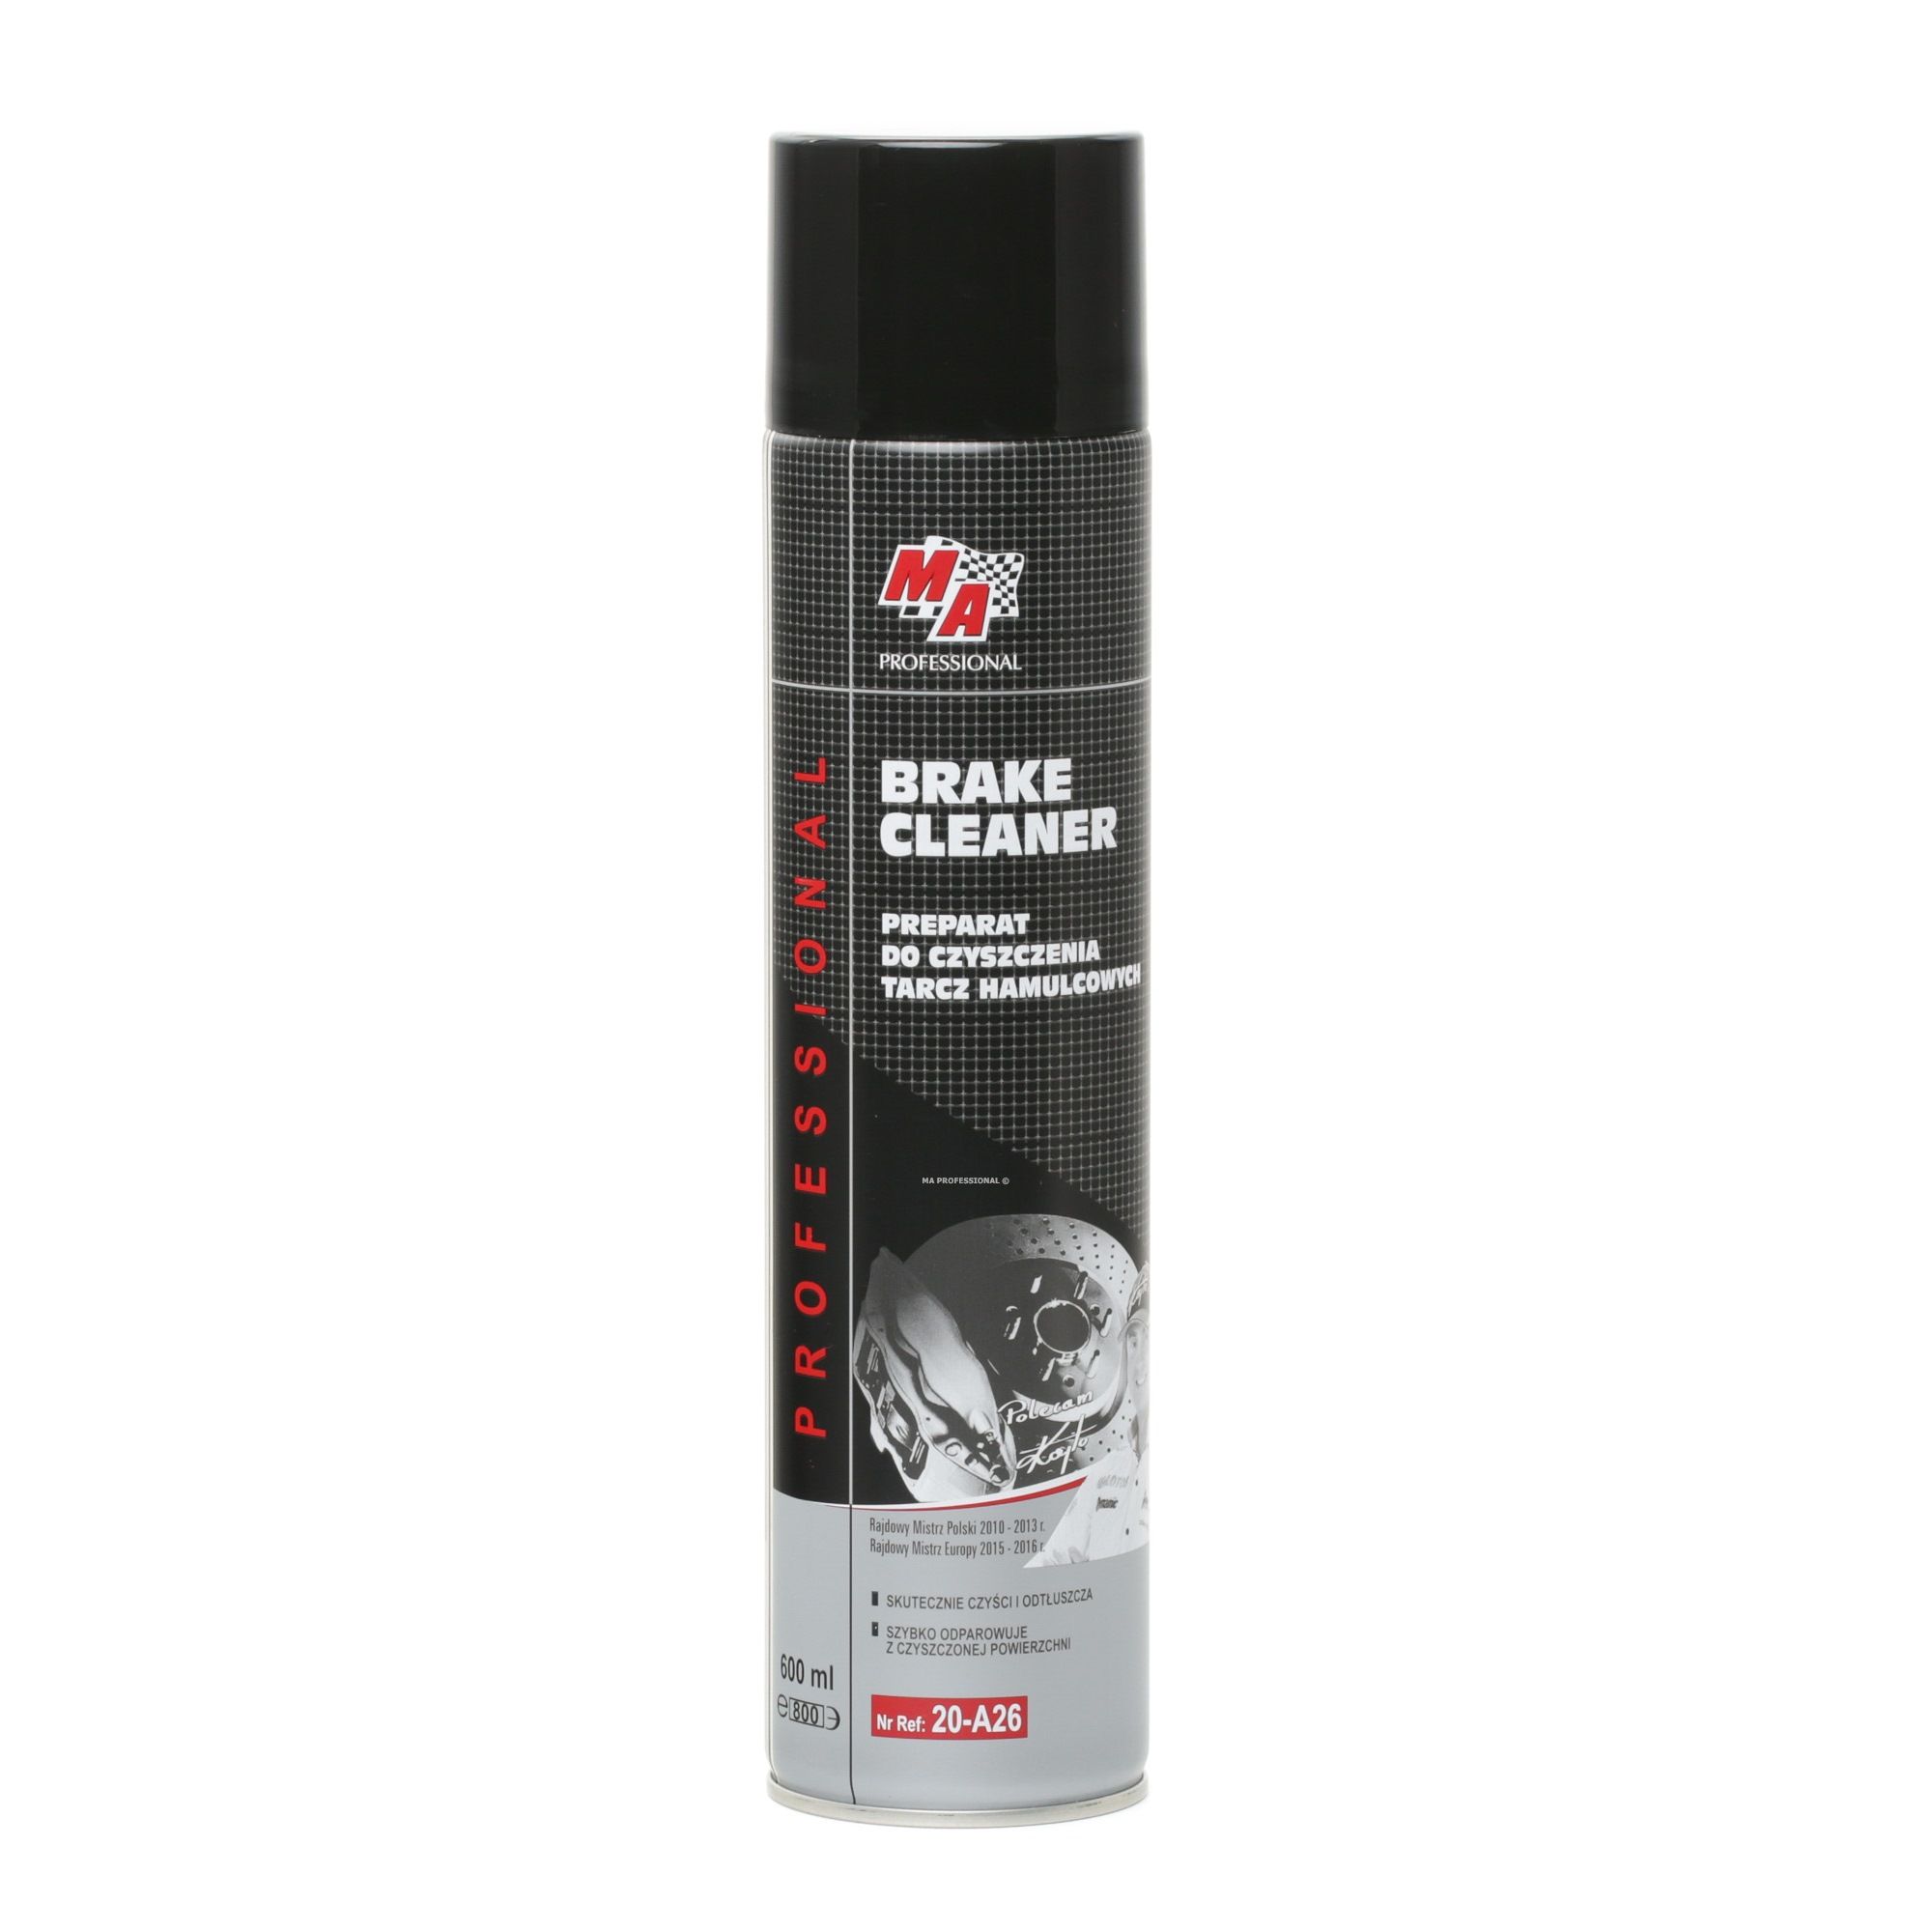 20-A26 MA PROFESSIONAL Brake / Clutch Cleaner - buy online